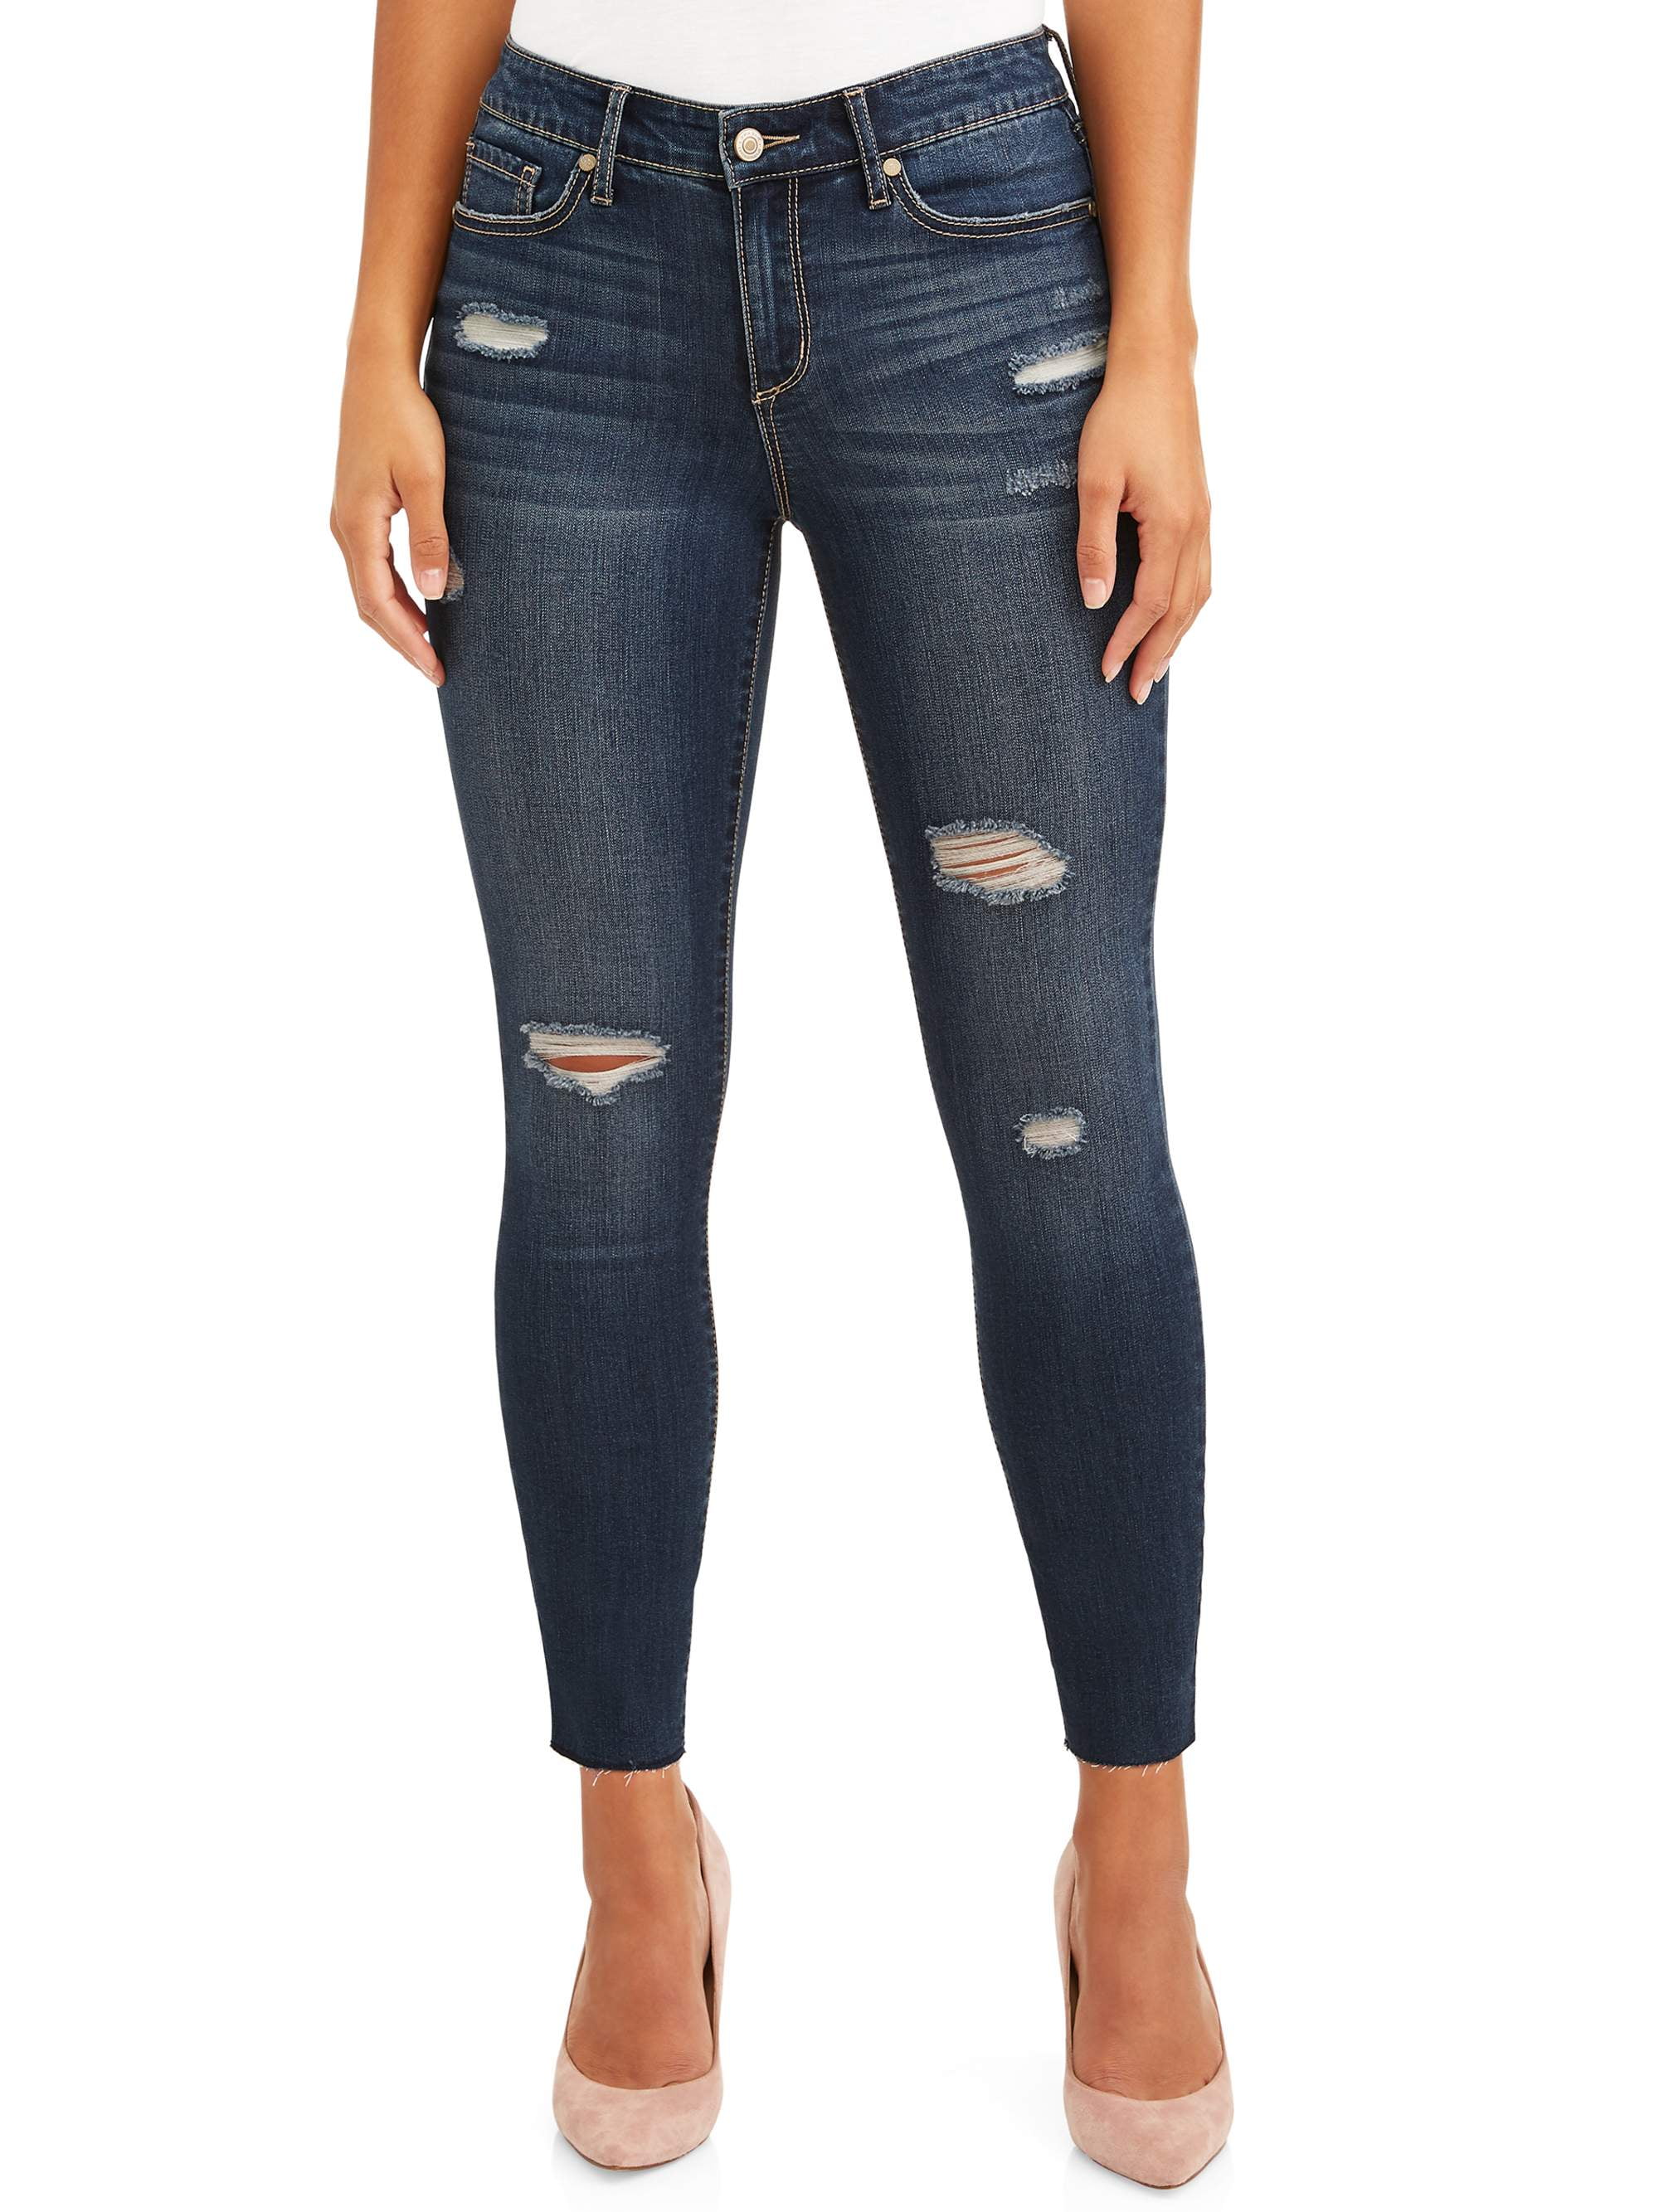 Sofia Jeans Sofia Skinny Destructed Mid Rise Stretch Ankle Jean Women's ...